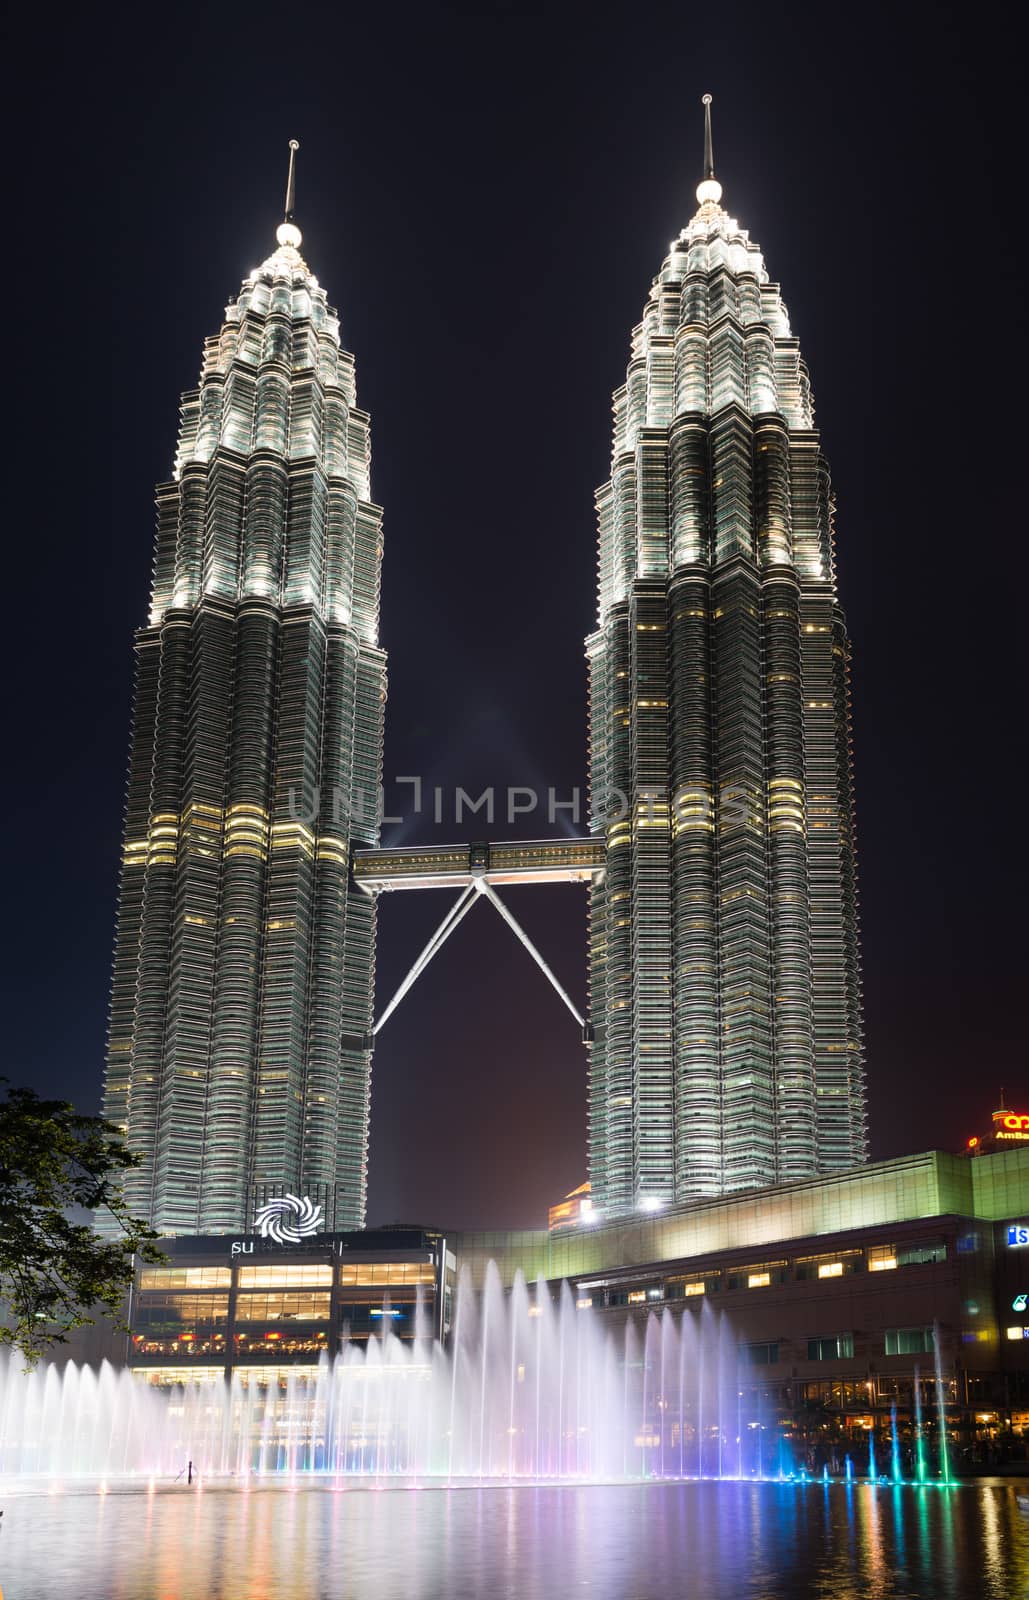 KUALA LUMPUR - JUN 15: Petronas Towers and Suria KLCC on Jun 15, 2013 in Kuala Lumpur, Malaysia. The towers were the tallest buildings in the world from 1998 to 2004  (451.9 m). 